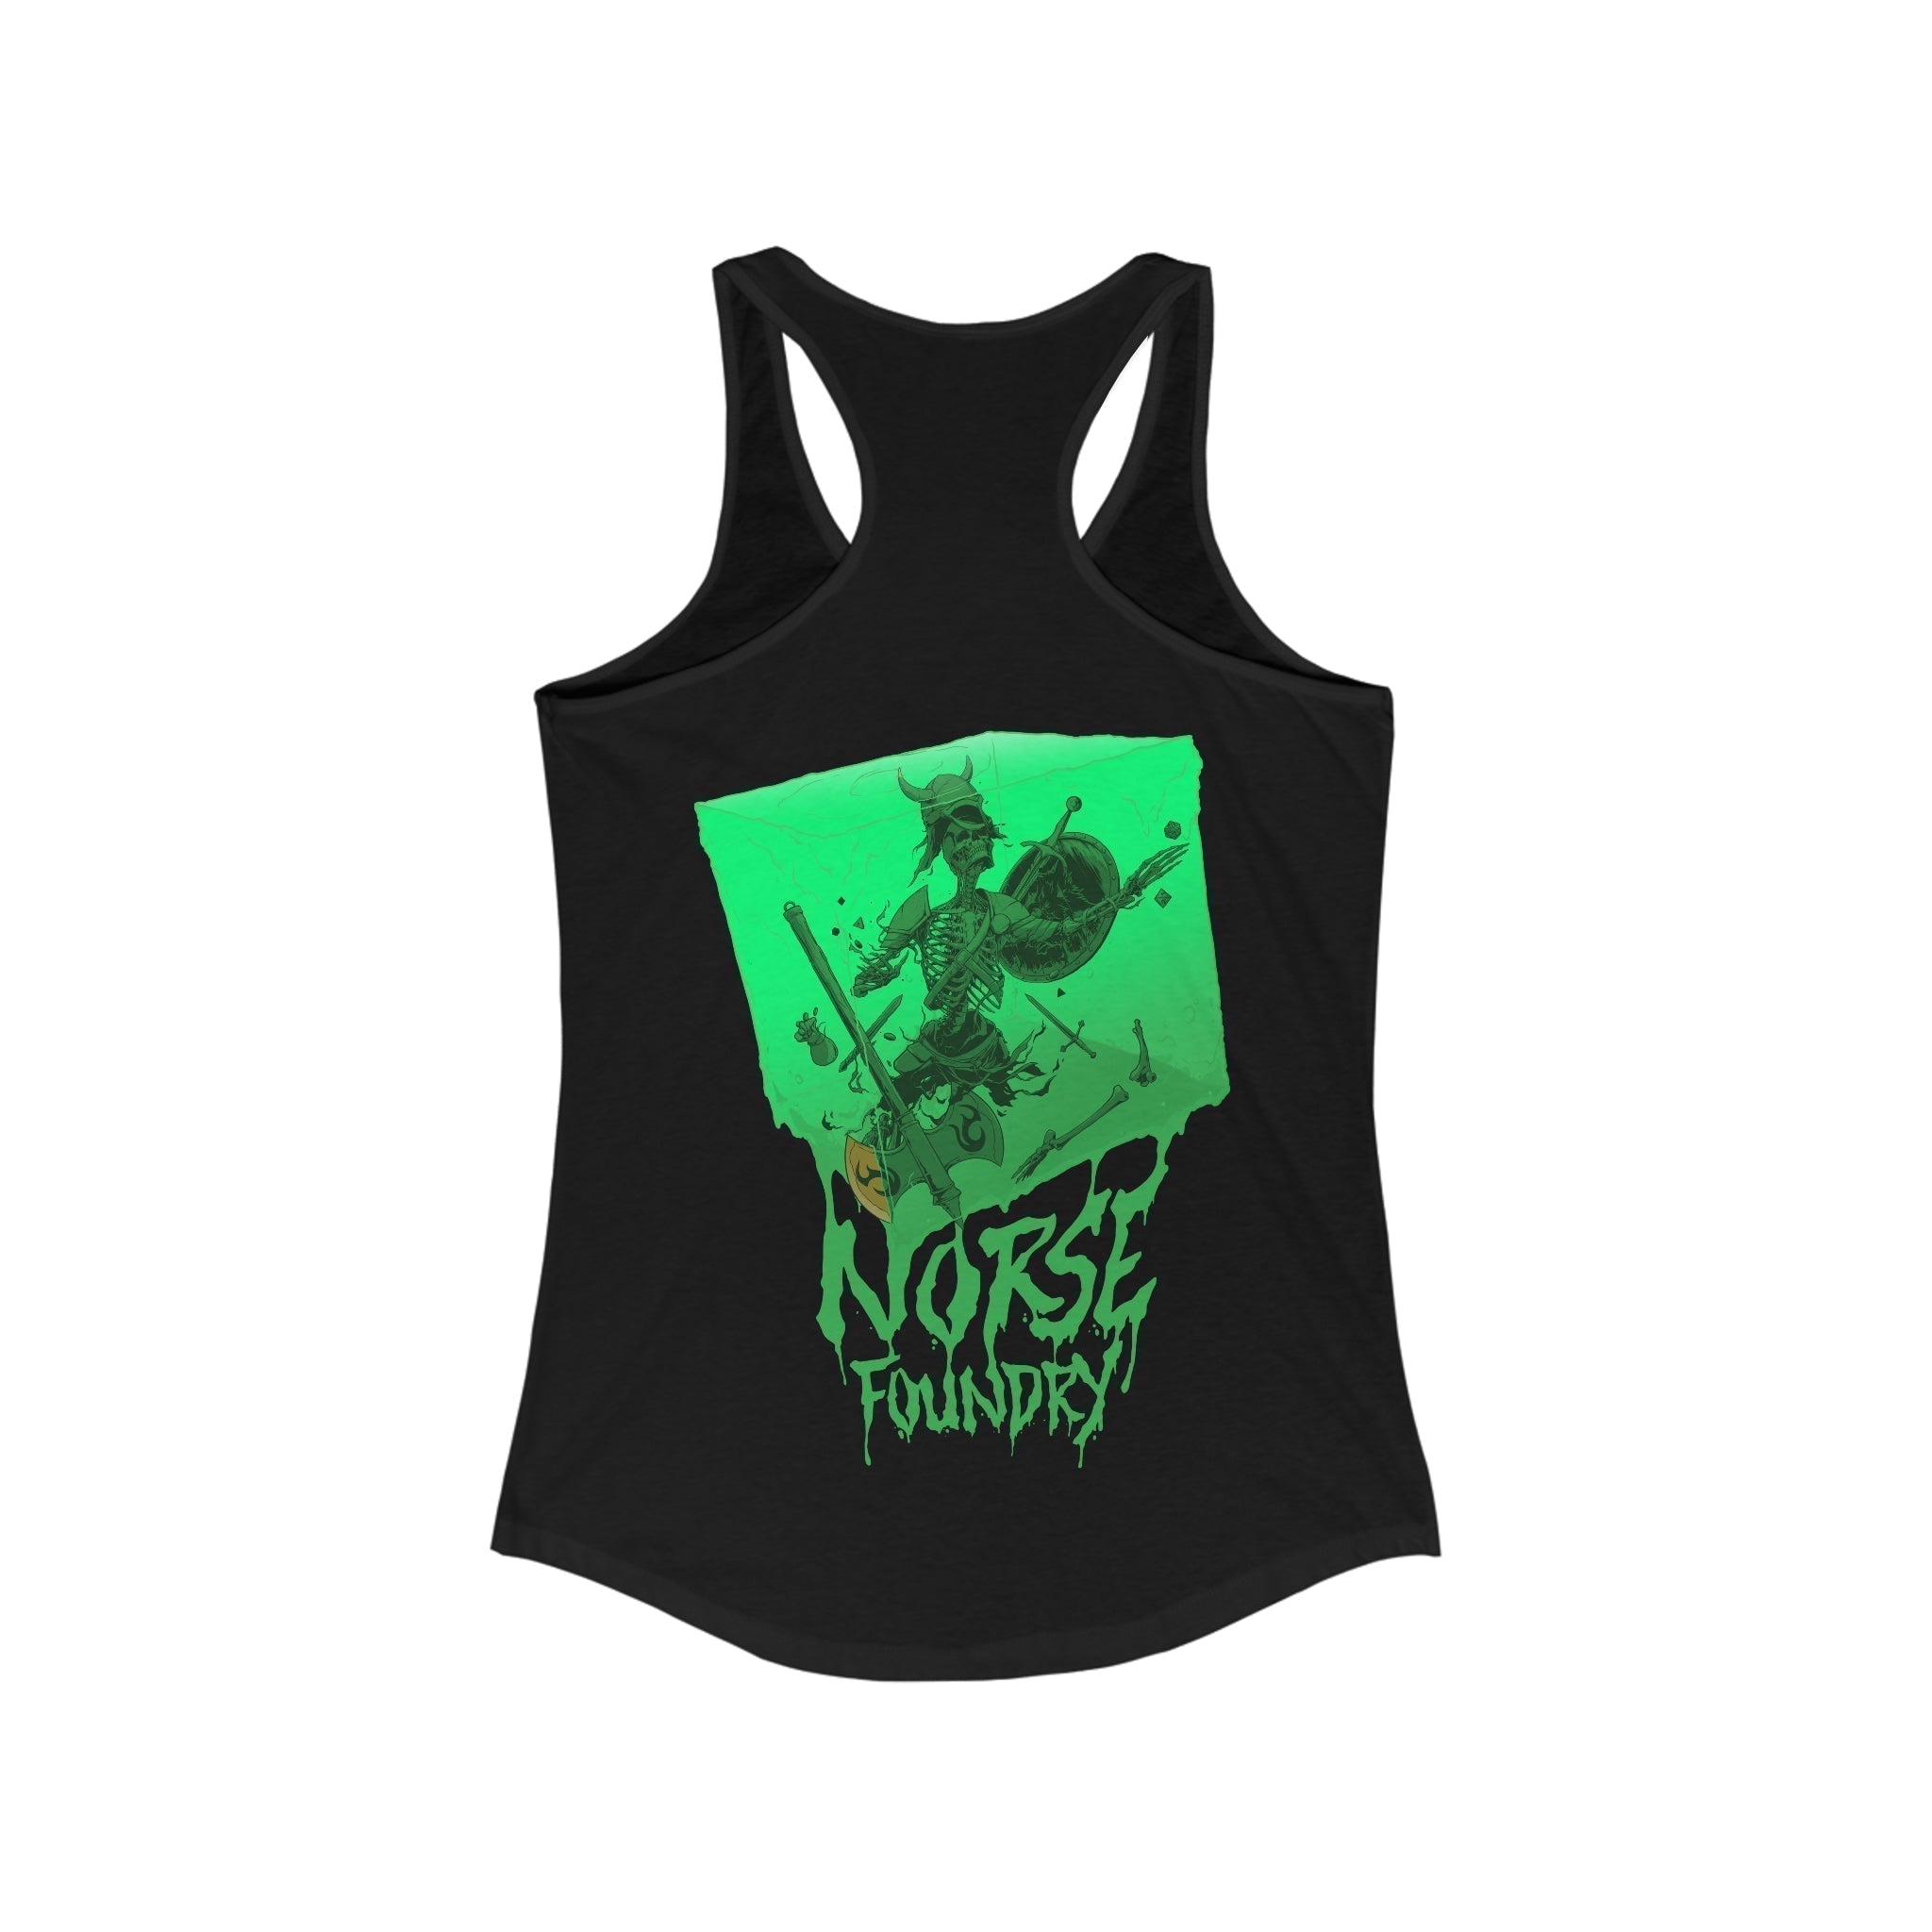 Cube - Norse Foundry Women's Tank Top - 70140229091871866554